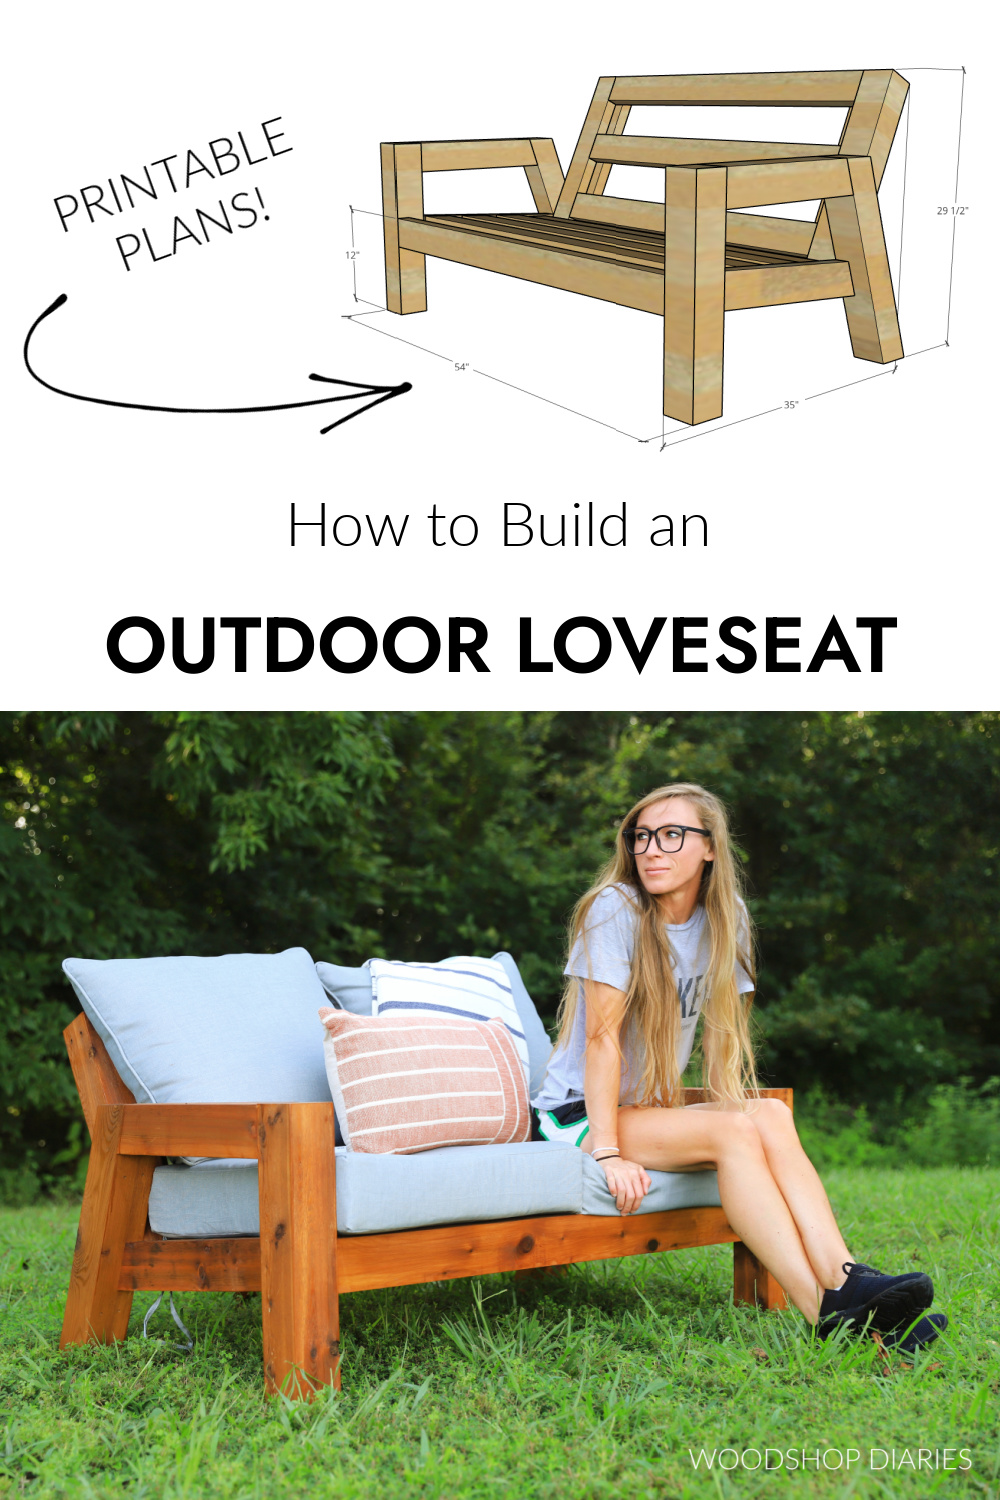 Pinterest collage image showing completed DIY outdoor loveseat with 2 outdoor cushions on bottom and dimensional diagram at top with text "how to build an outdoor loveseat printable plans"